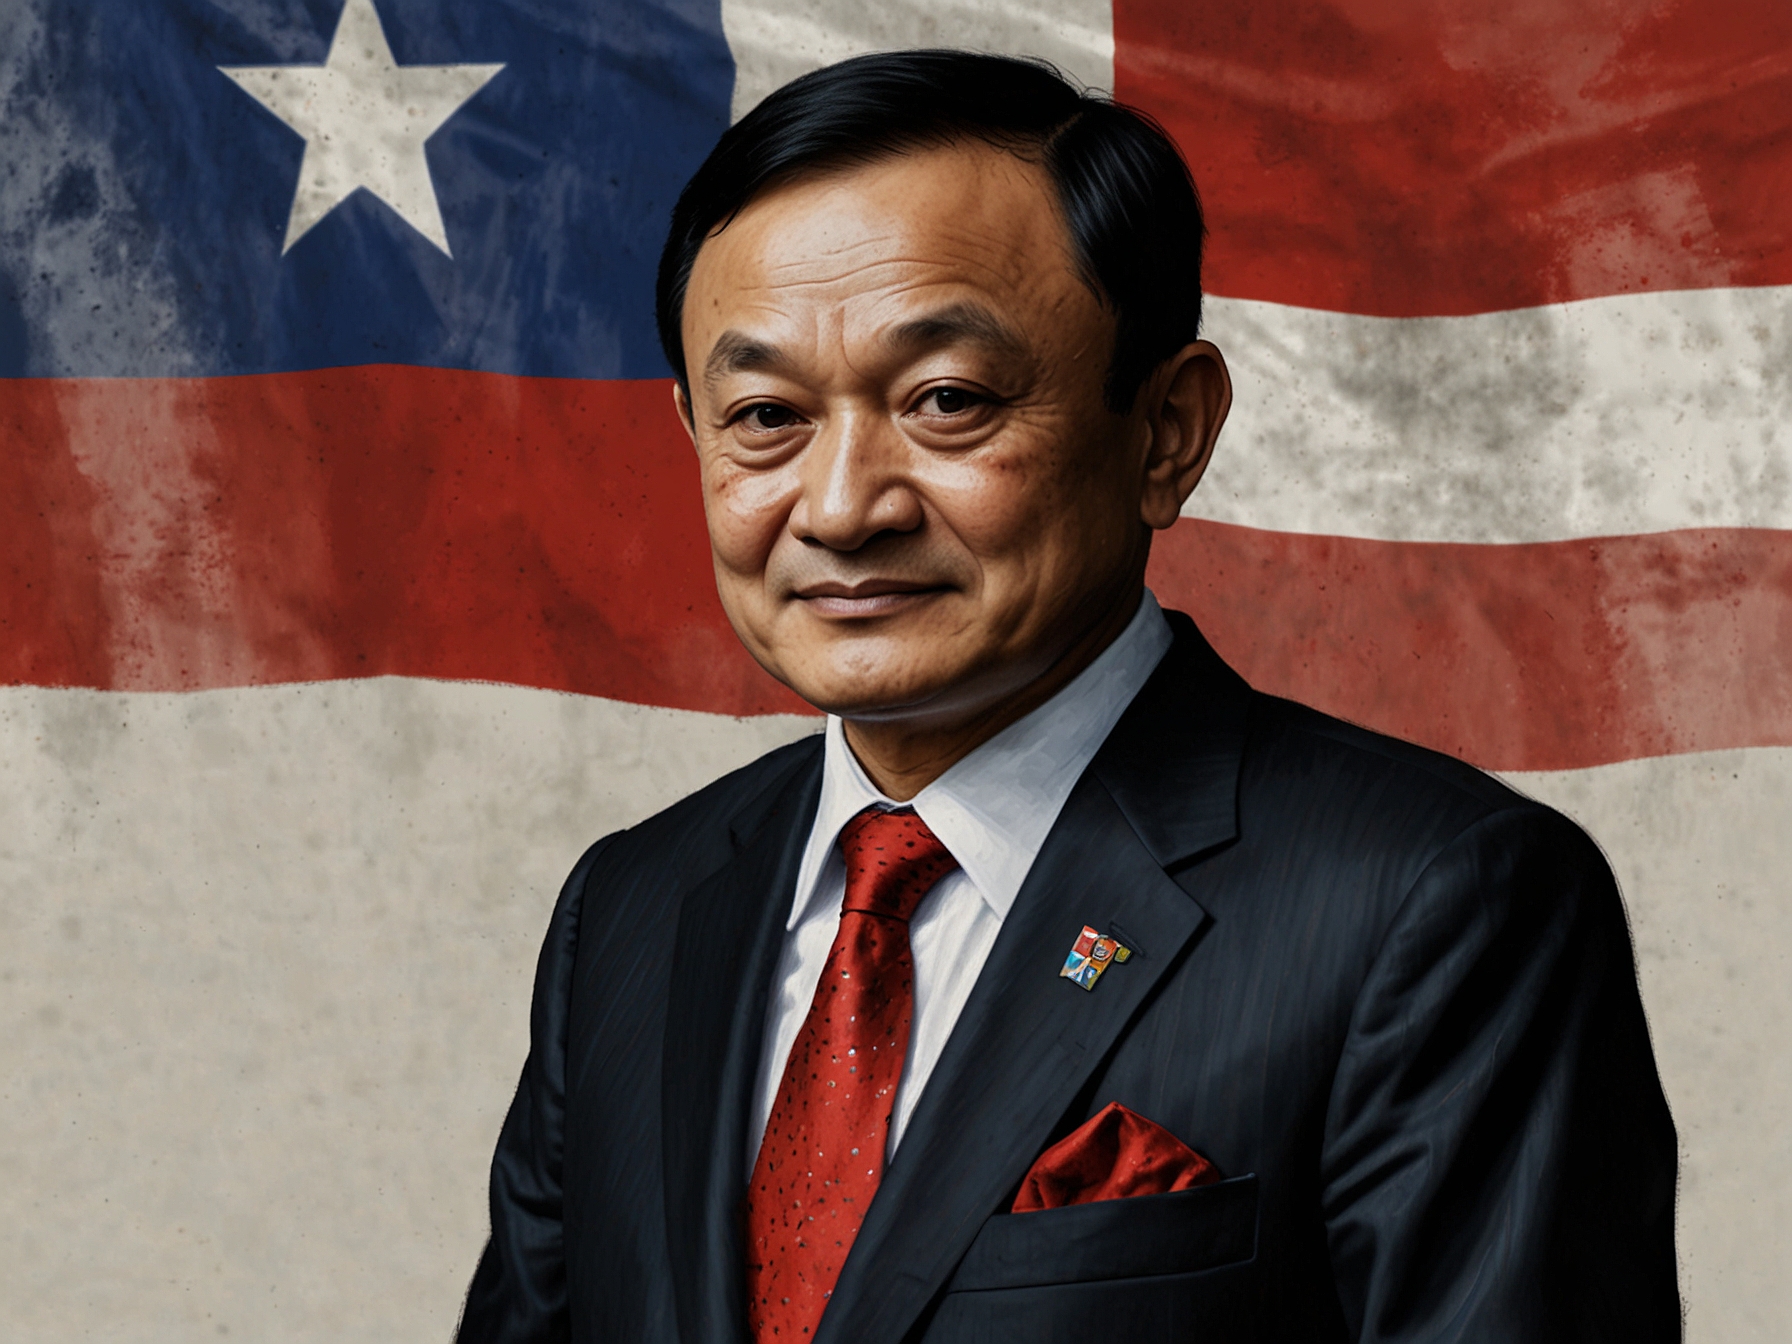 Portrait of former Thai Prime Minister Thaksin Shinawatra, illustrating his controversial political career and charges under Thailand's lèse-majesté laws.